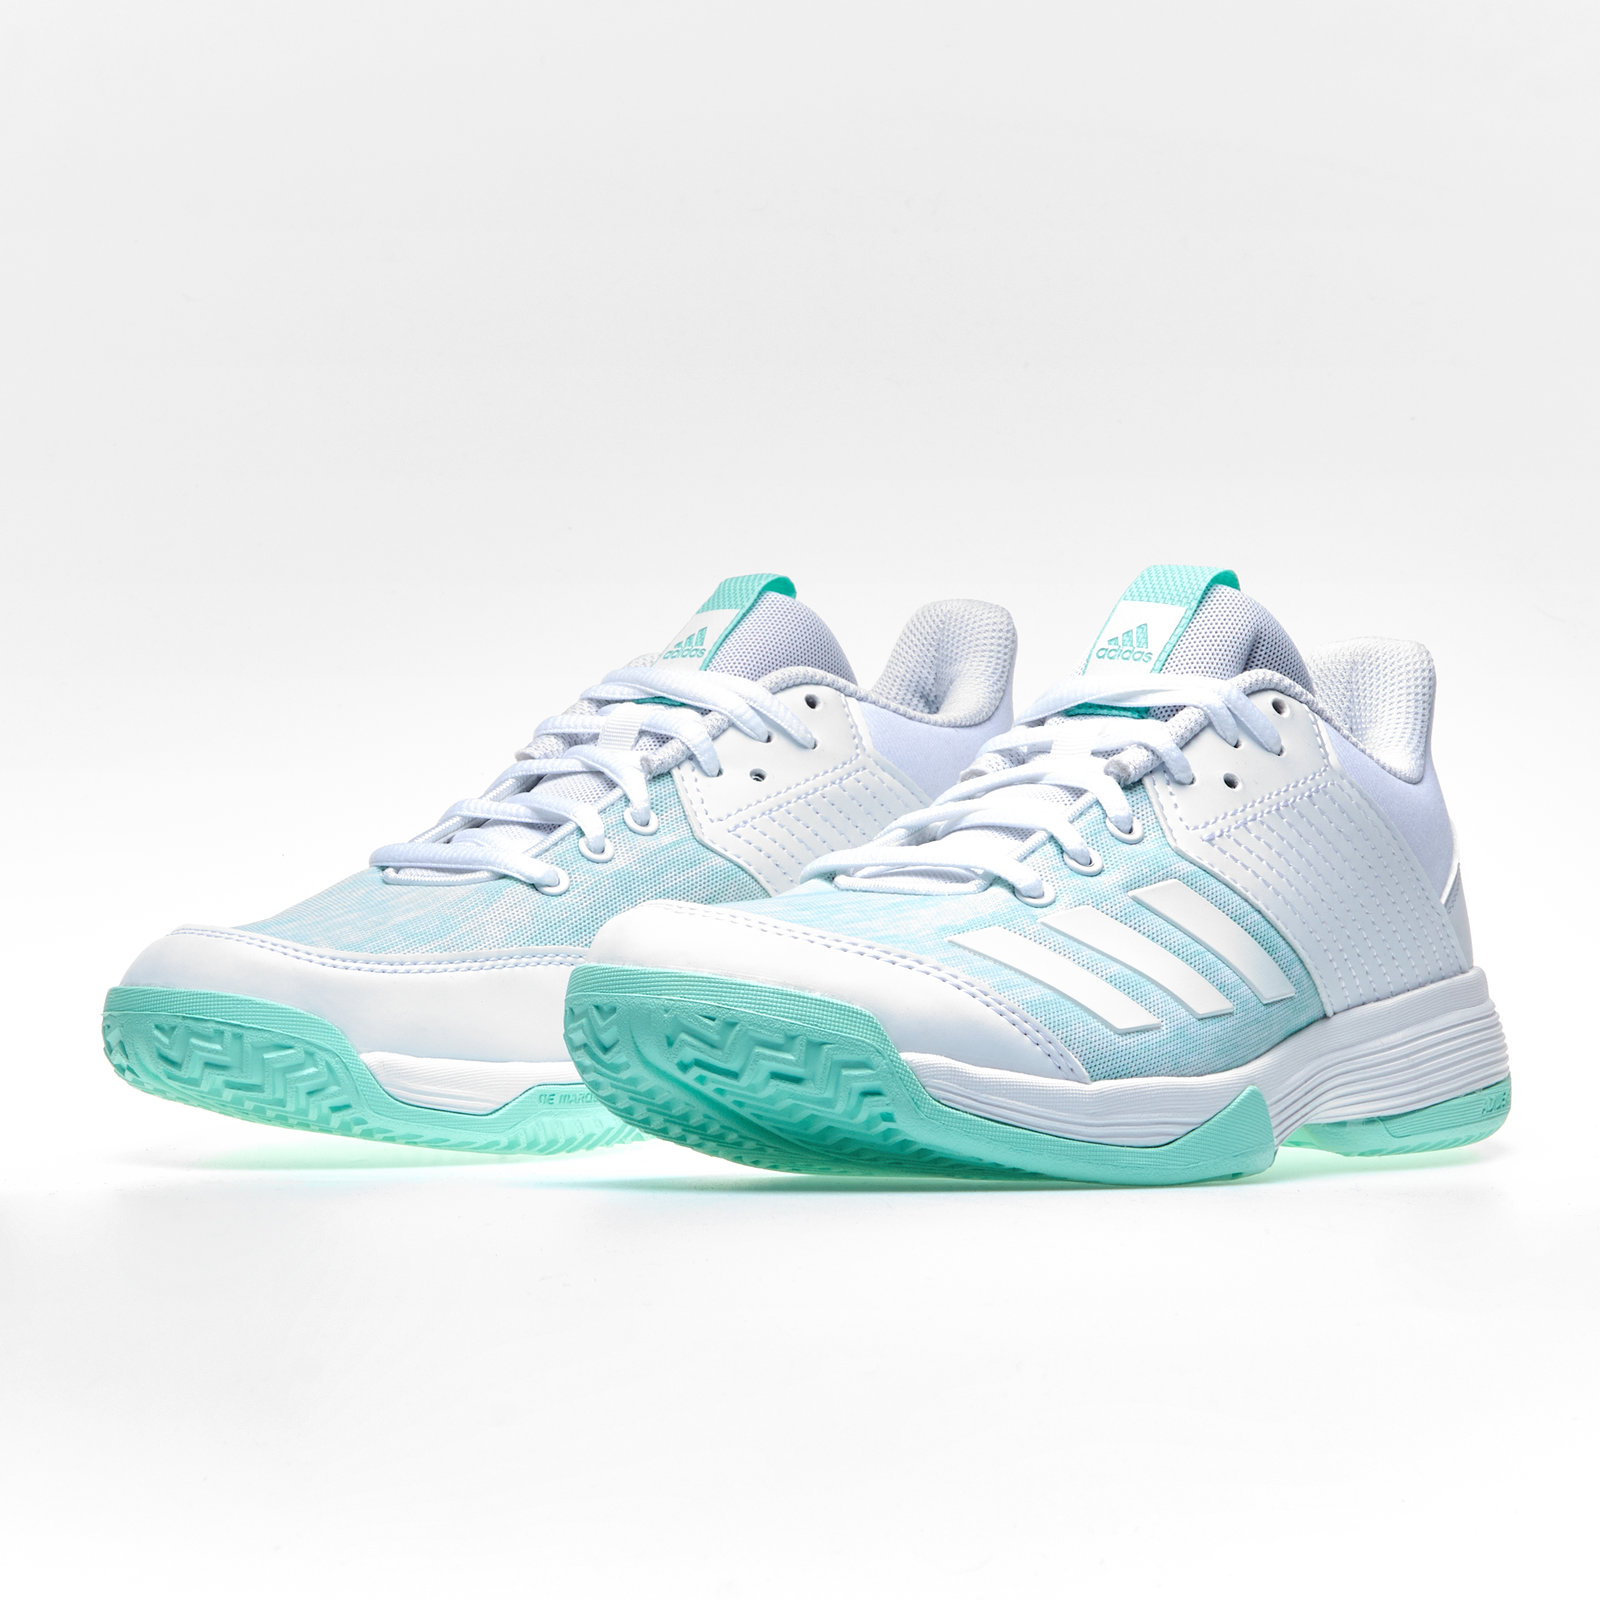 netball shoes adidas off 60% - www 